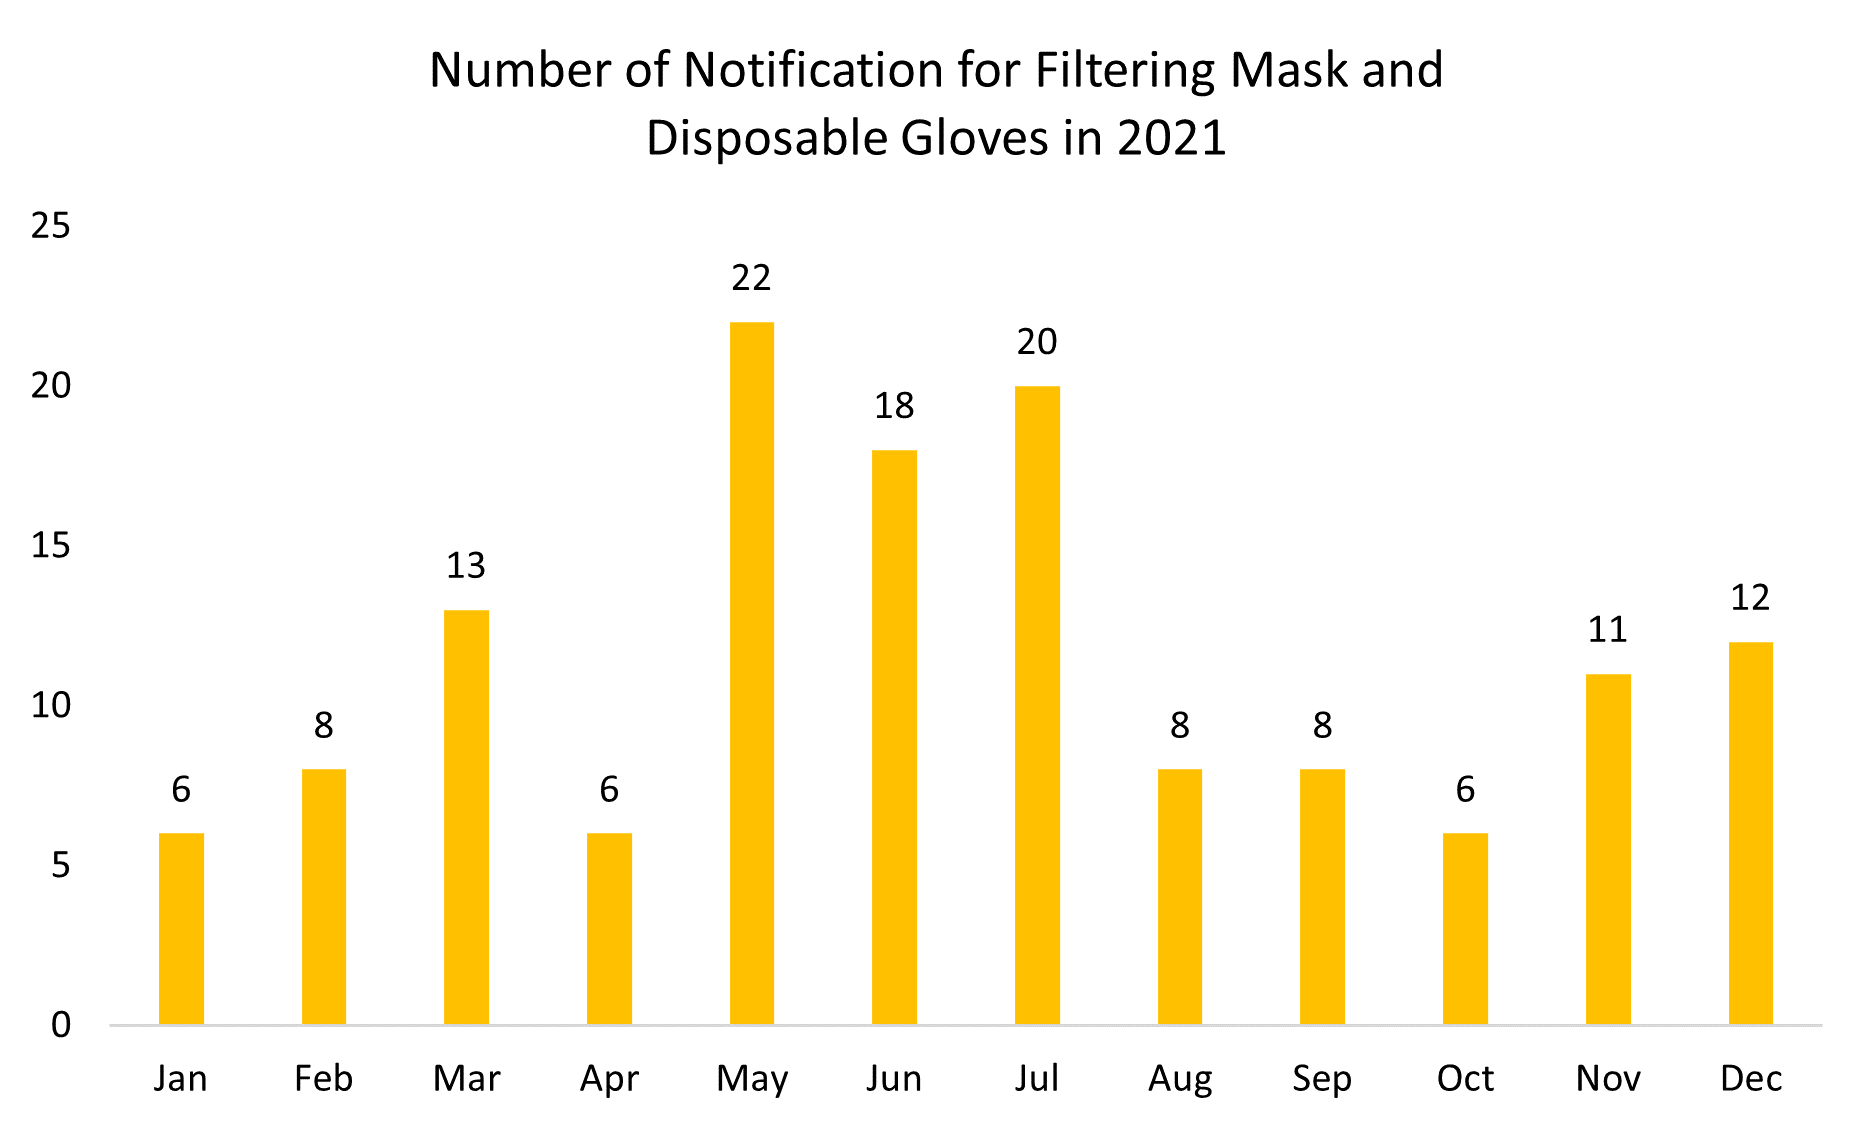 Number of notifications for filtering masks and disposable gloves (2021)